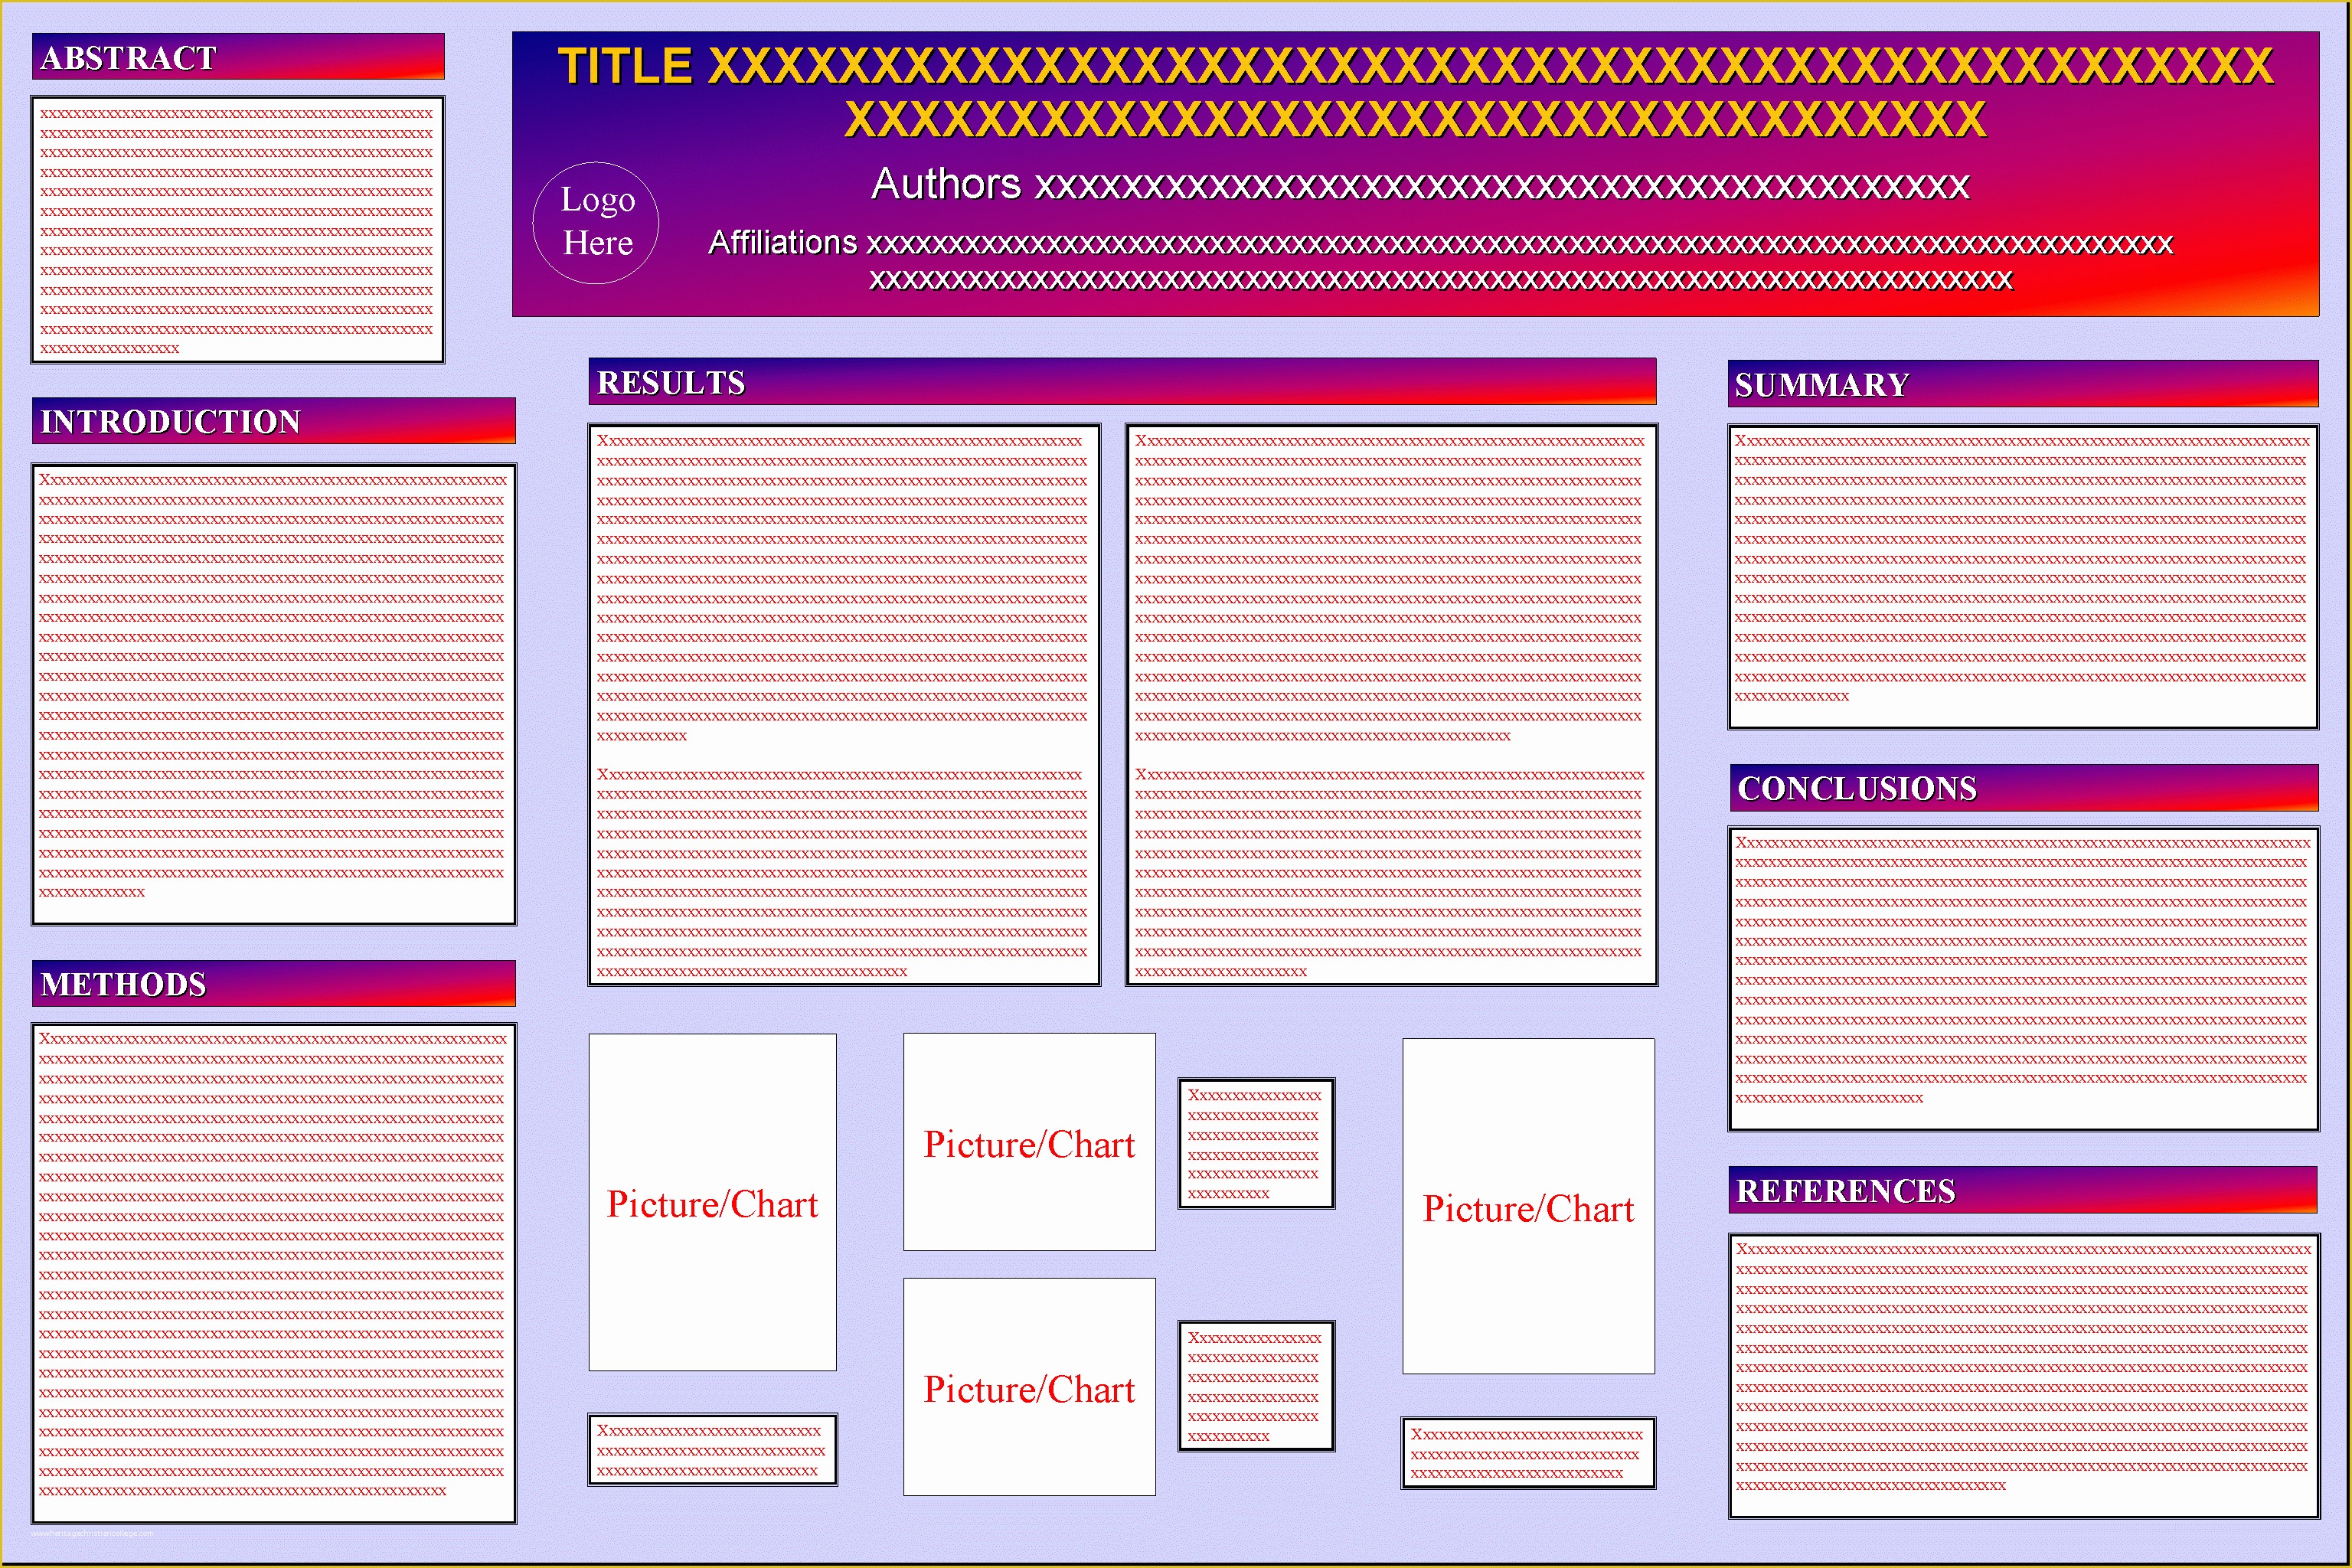 Scientific Poster Design Templates Free Of Creating A Poster From A Powerpoint File is Straight forward